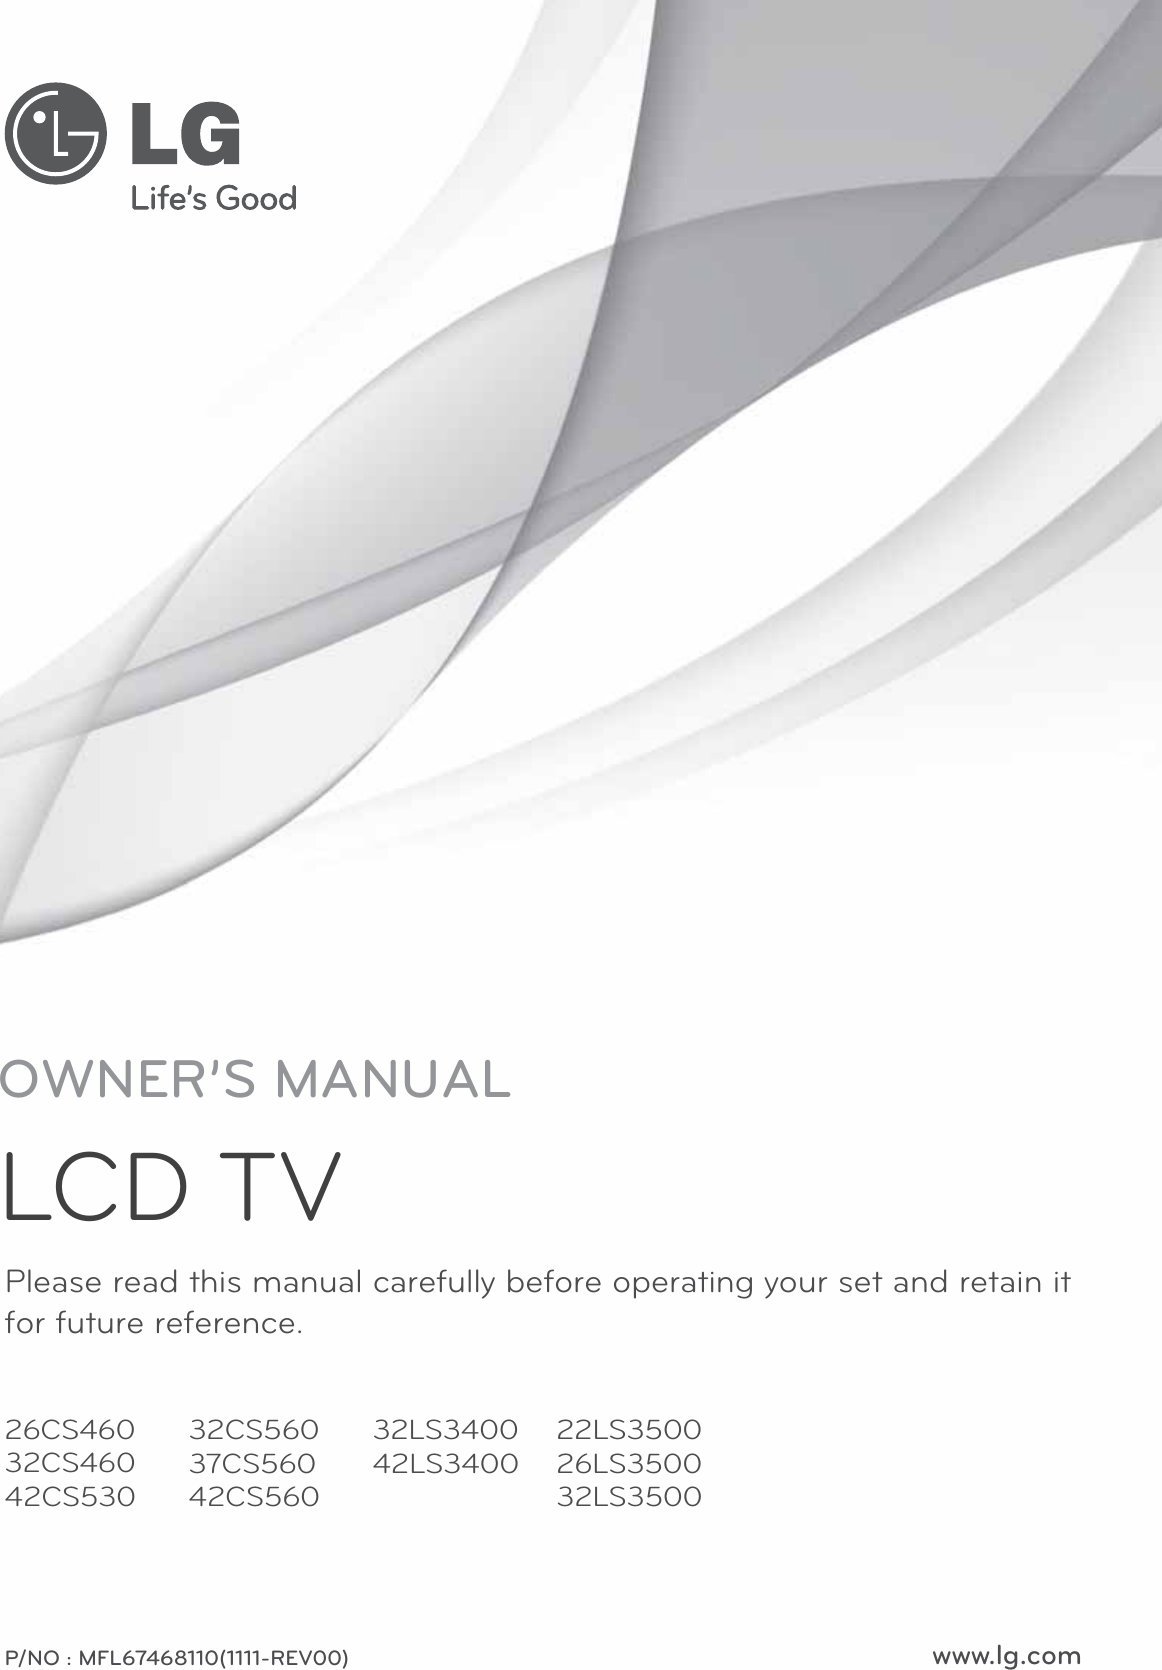 www.lg.comPlease read this manual carefully before operating your set and retain it for future reference.26CS46032CS46042CS530P/NO : MFL67468110(1111-REV00)32CS56037CS56042CS56032LS340042LS340022LS350026LS350032LS3500OWNER’S MANUALLCD TV